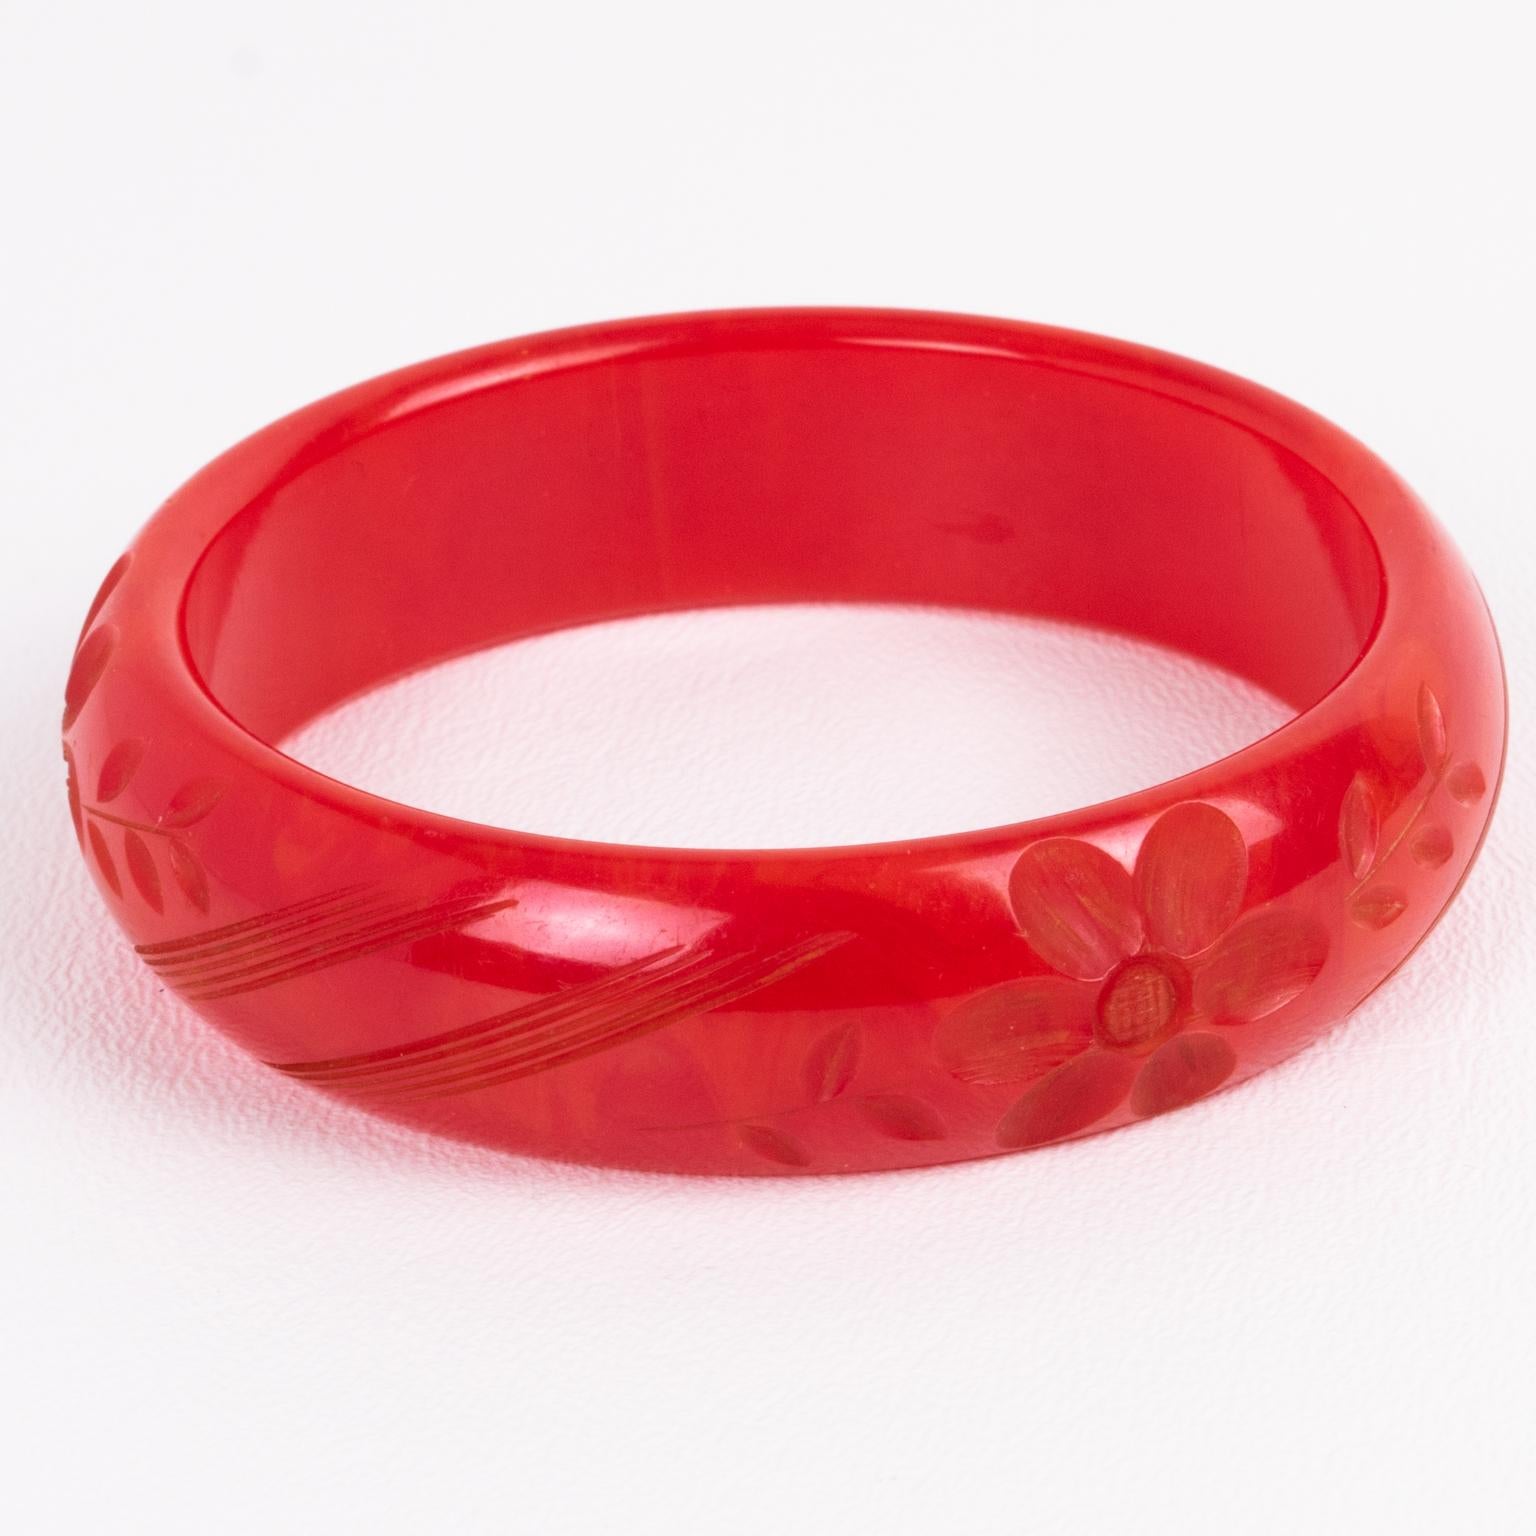 This is a gorgeous magenta-red marble Bakelite carved bracelet bangle. It features a spacer domed shape with a deep geometric and floral carving. The color is an intense bright red tone with light orange cloudy swirling. 
Measurements: Inside across